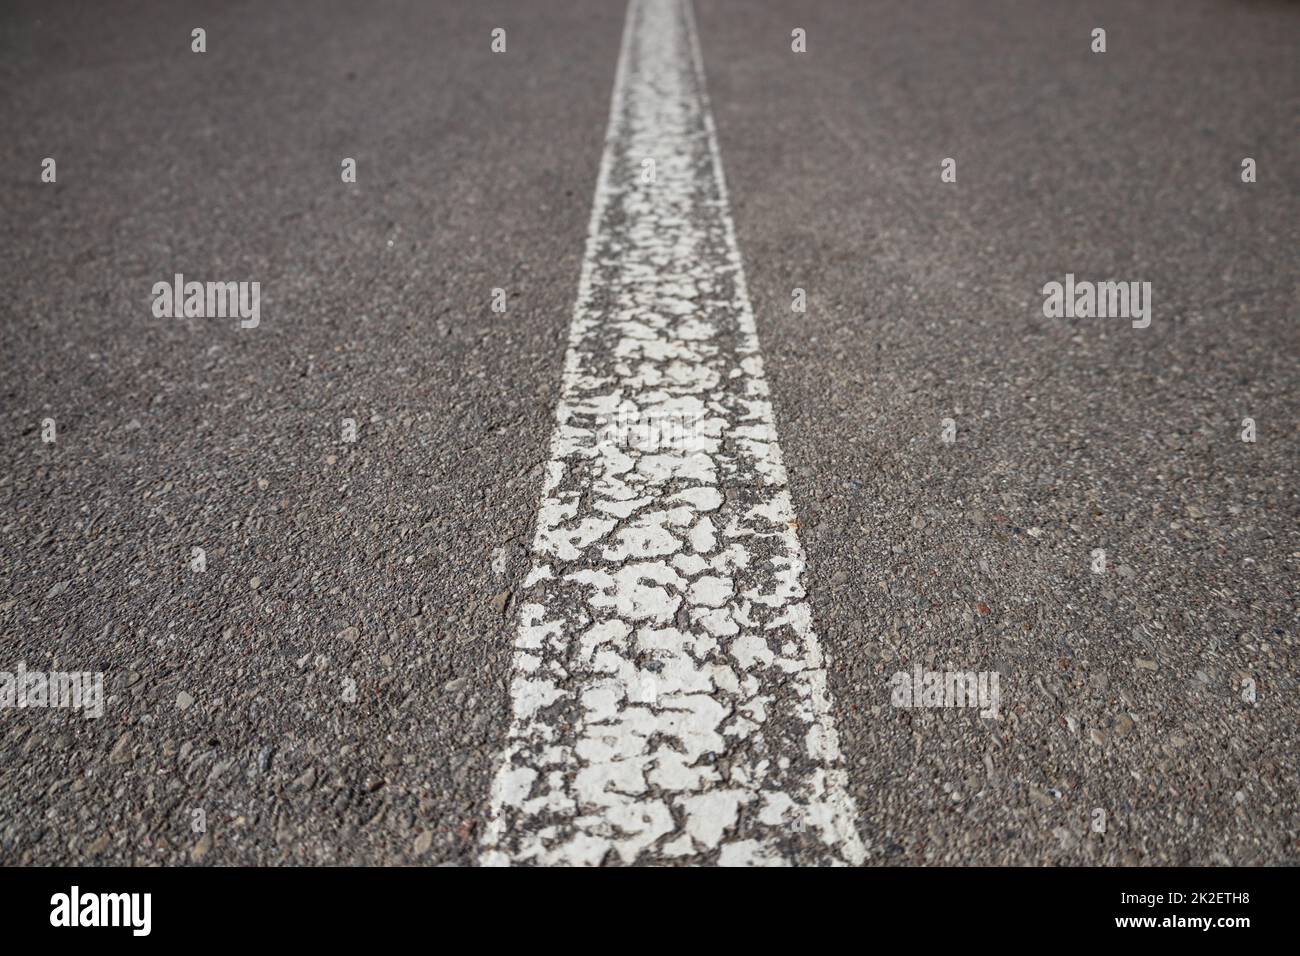 Asphalt road with single solid white line road marking Stock Photo